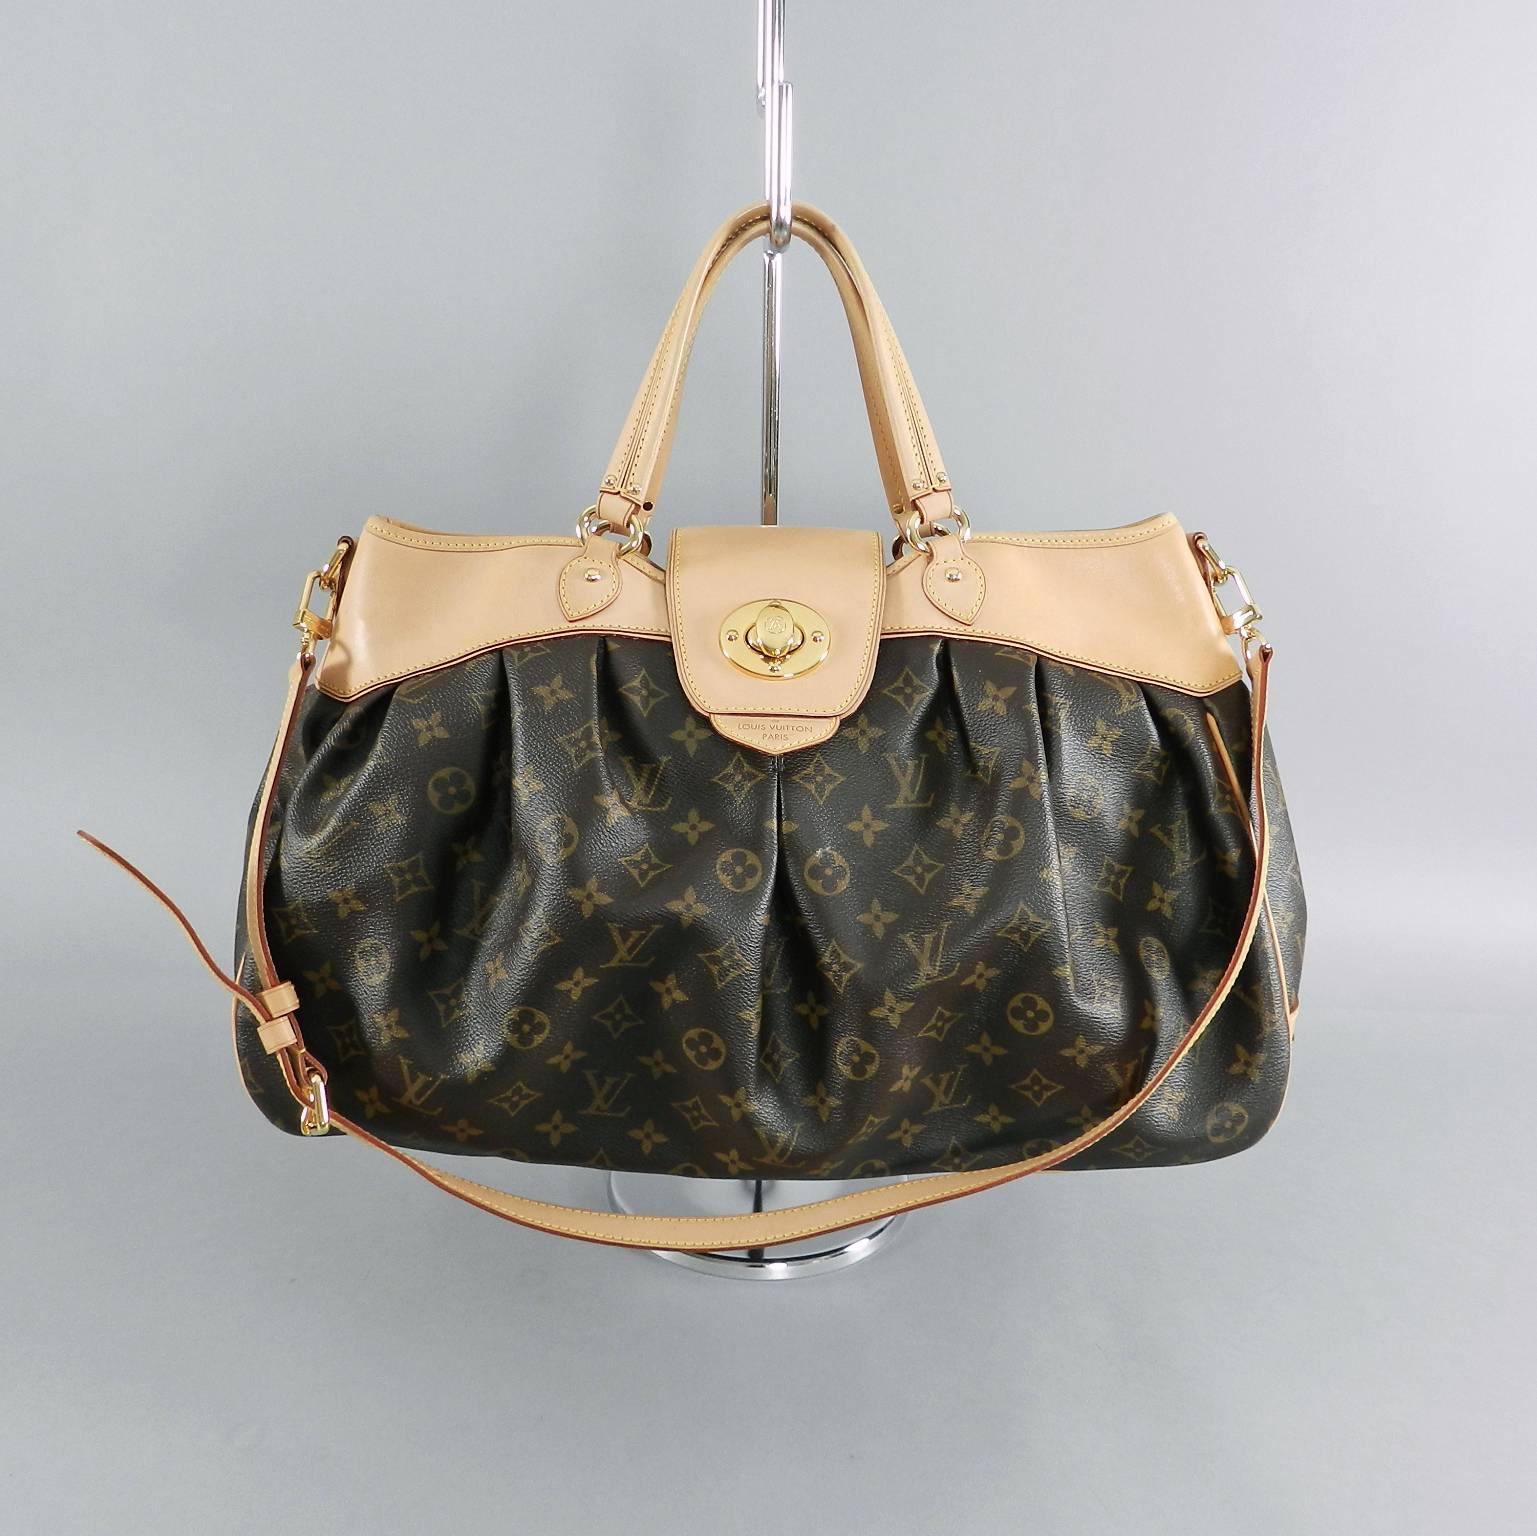 Louis Vuitton Monogram Canvas Boetie Bag GM.  A now discontinued model, original retailed for $2580.  Date code FL1079 for year 2009. Excellent clean pre-owned condition.  Exterior bottom right corner shows light marks (as pictured).  Interior